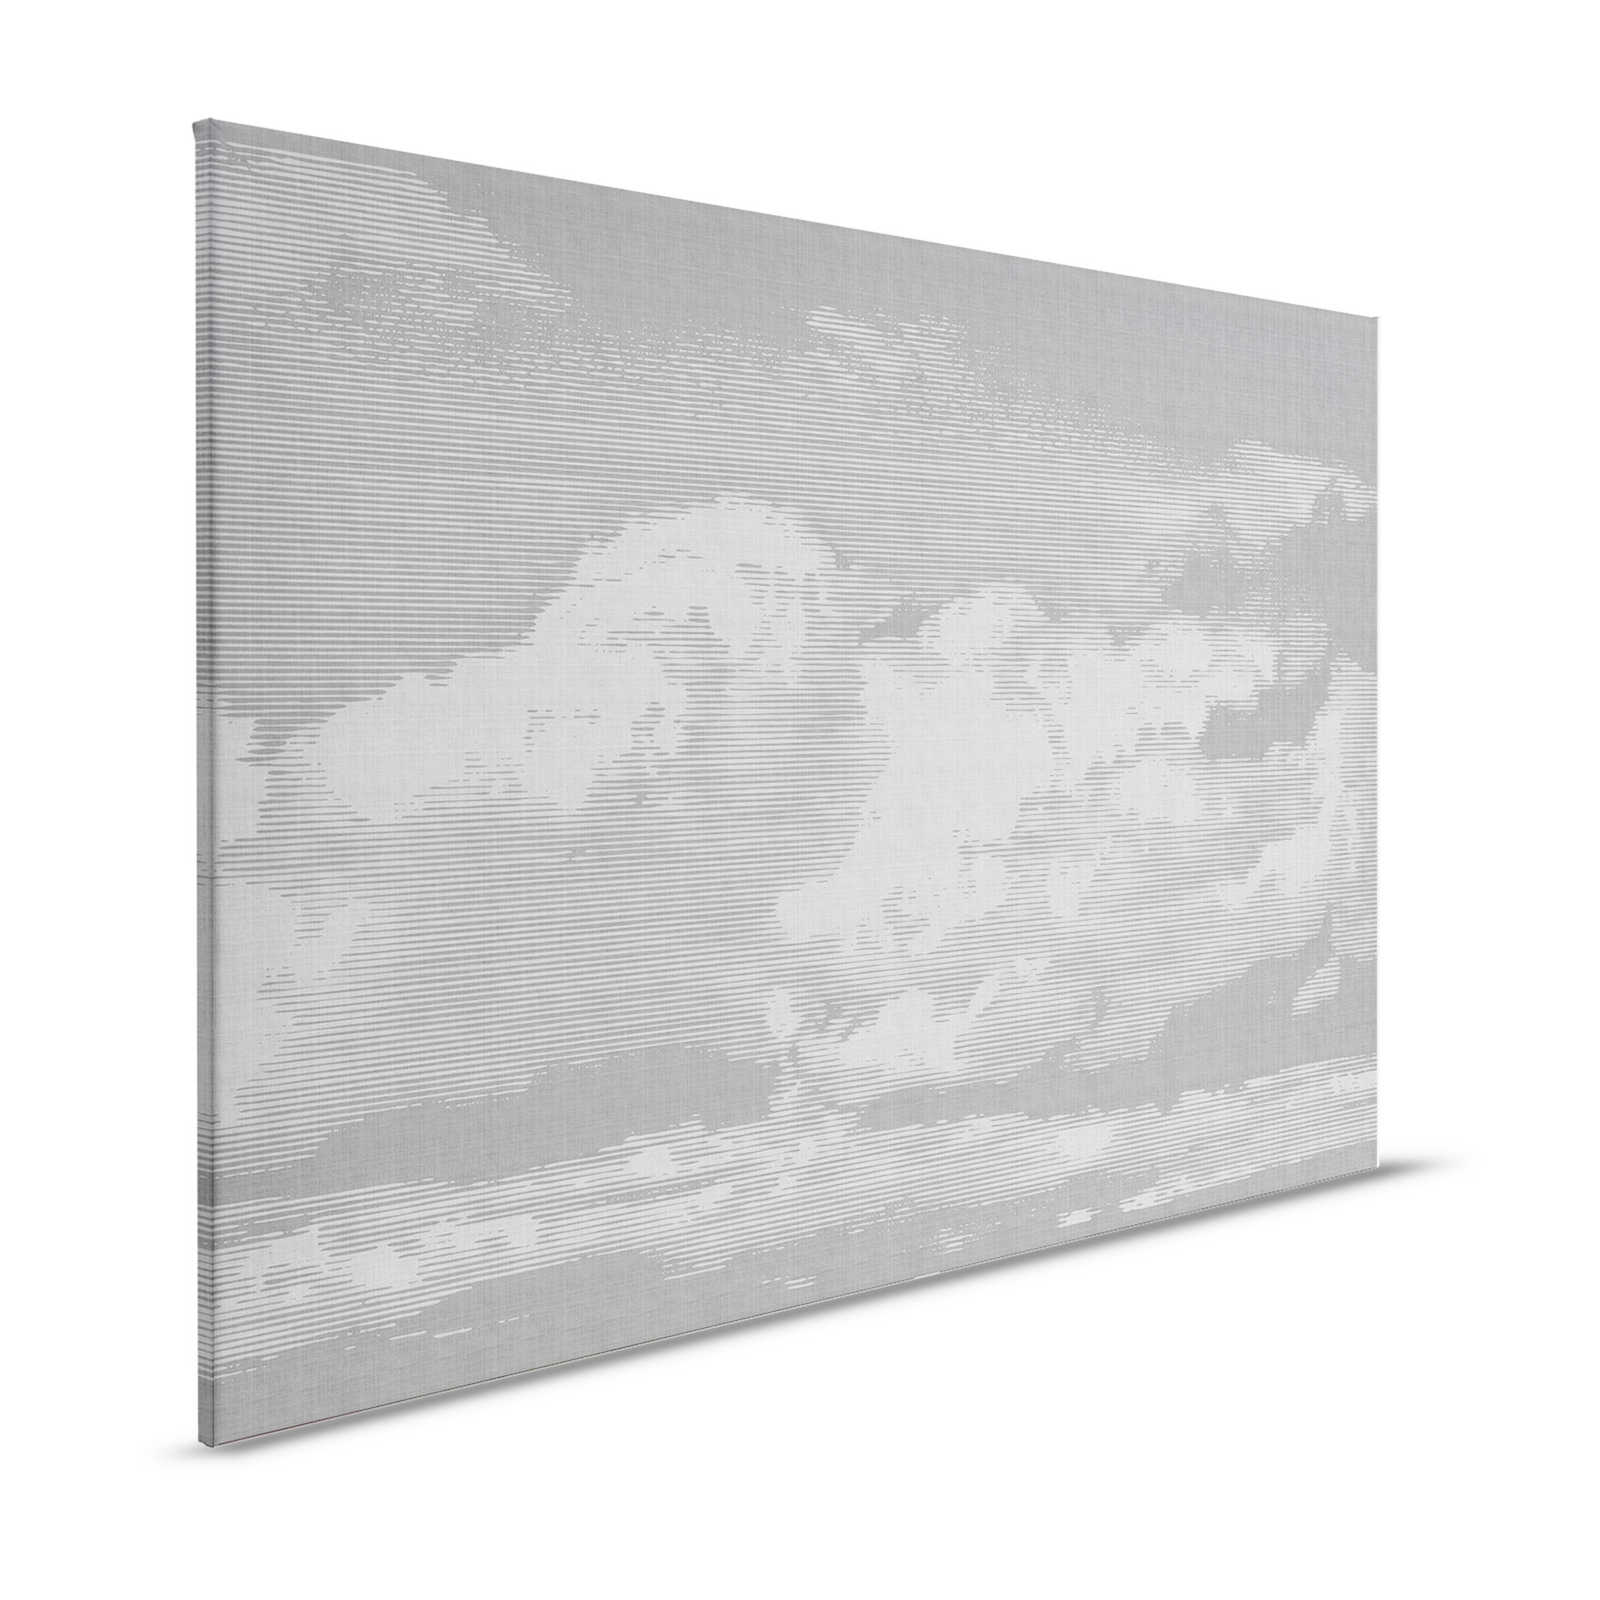 Clouds 2 - Heavenly canvas picture in natural linen look with cloud motif - 1.20 m x 0.80 m
